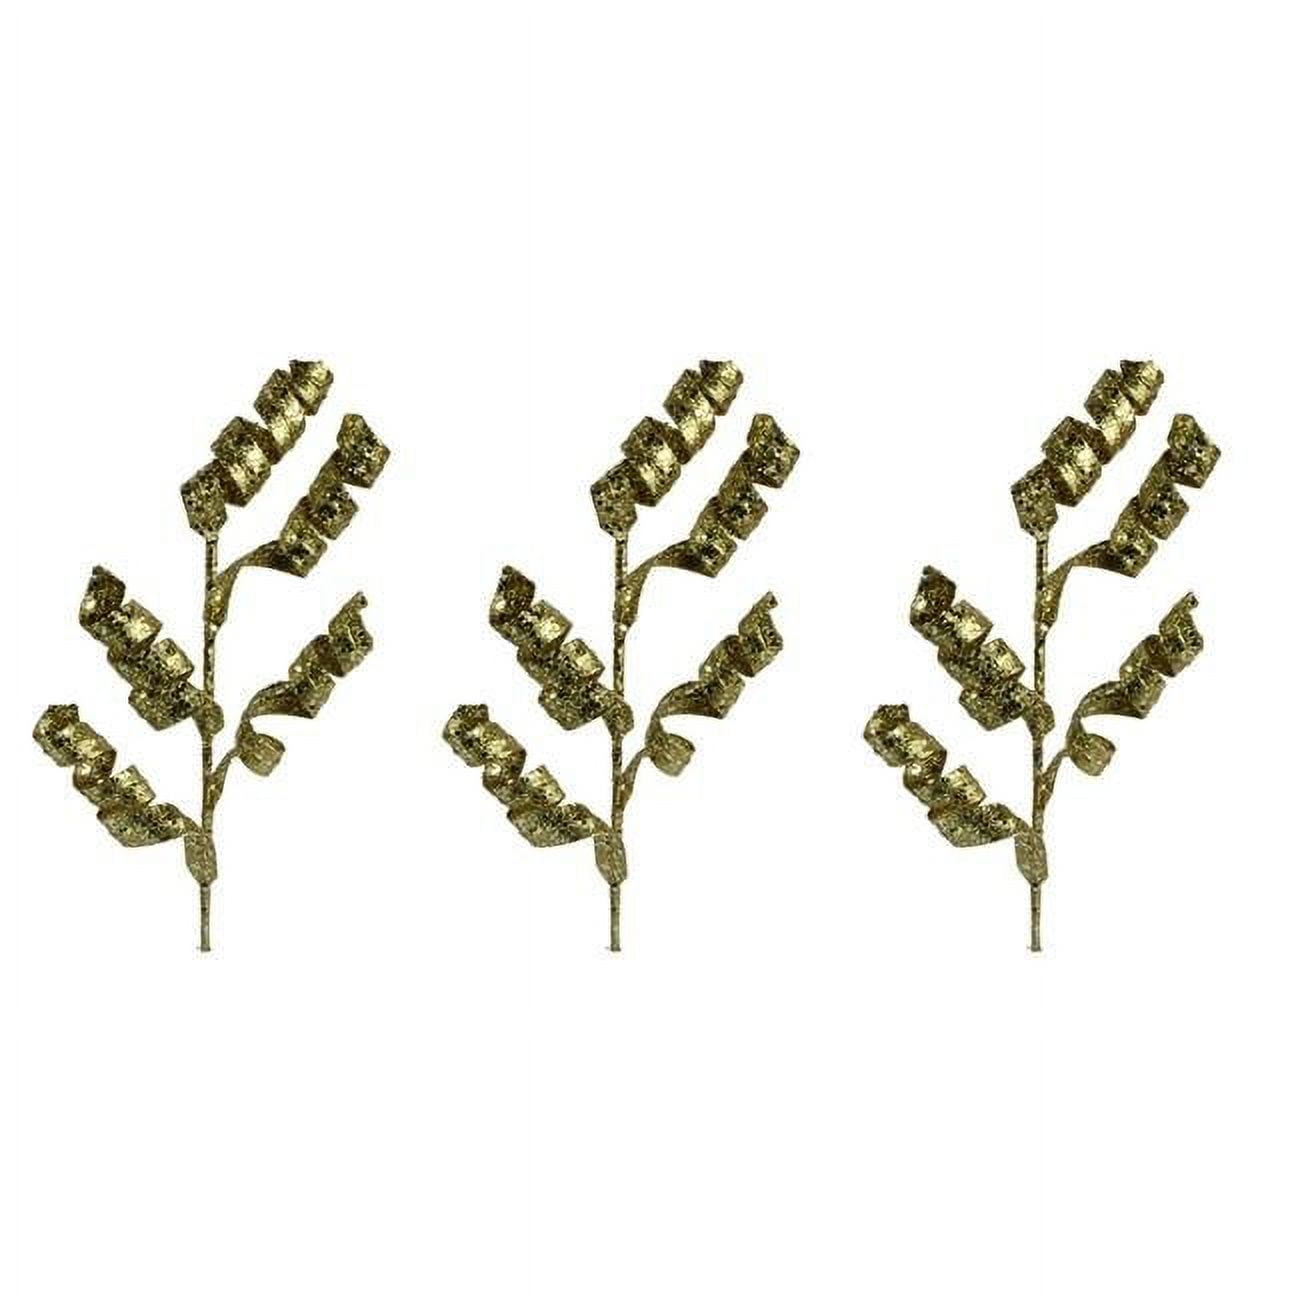 Admired By Nature Gxl7707-gold-3 26 In. Glitter Spiral Spray Christmas Decor, Gold - Set Of 3